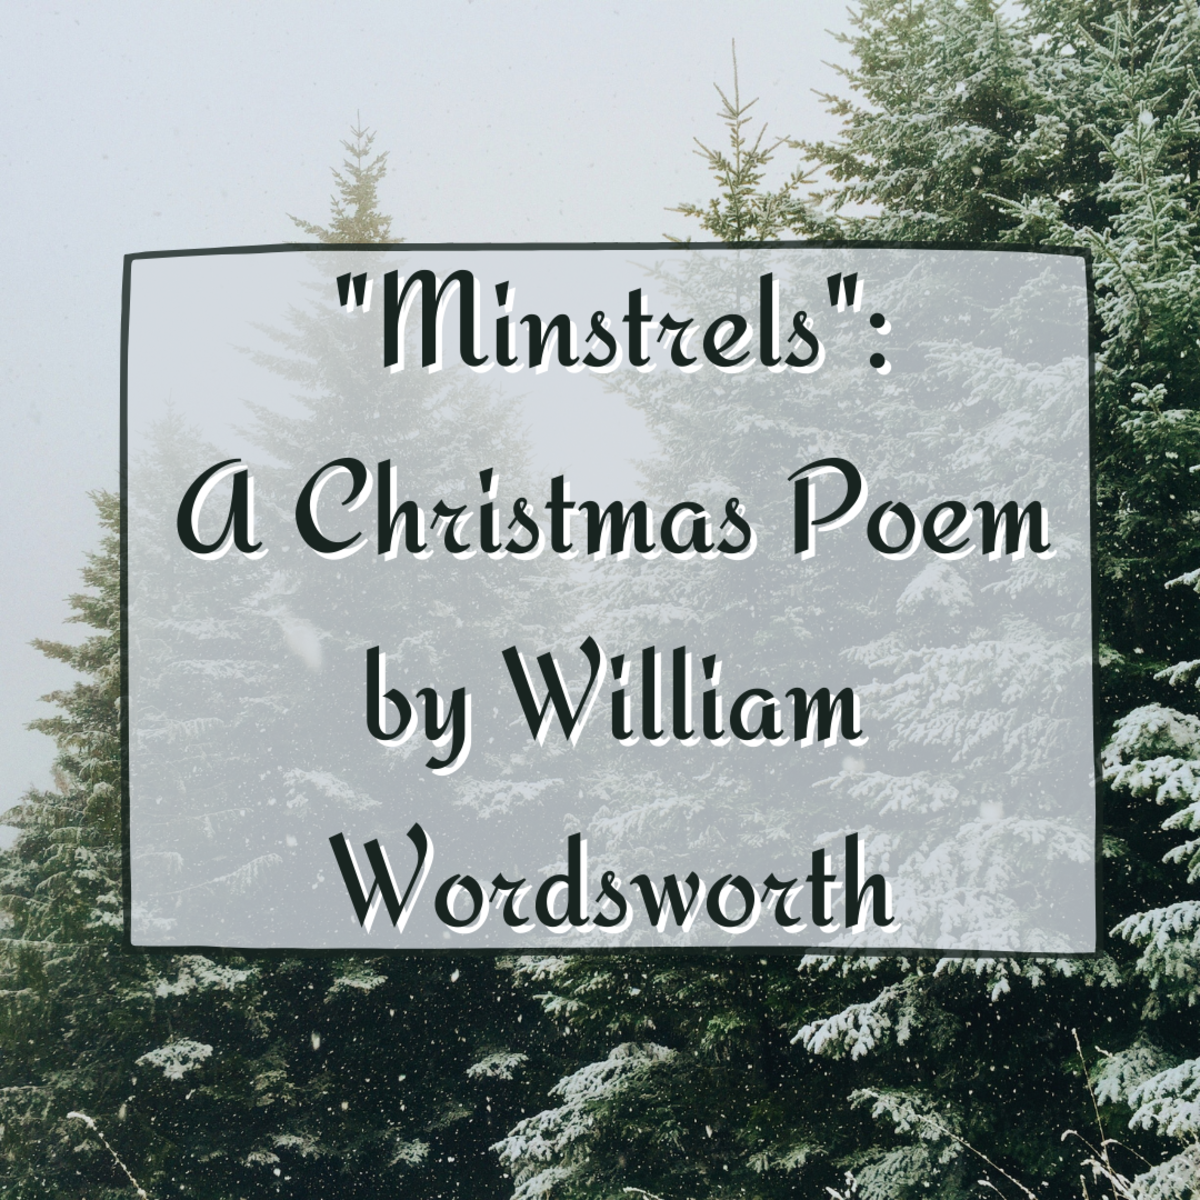 This article explains and analyses the poem "Minstrels" by William Wordsworth. The poem features wassailers. Read on to learn all about this classic Christmas poem.